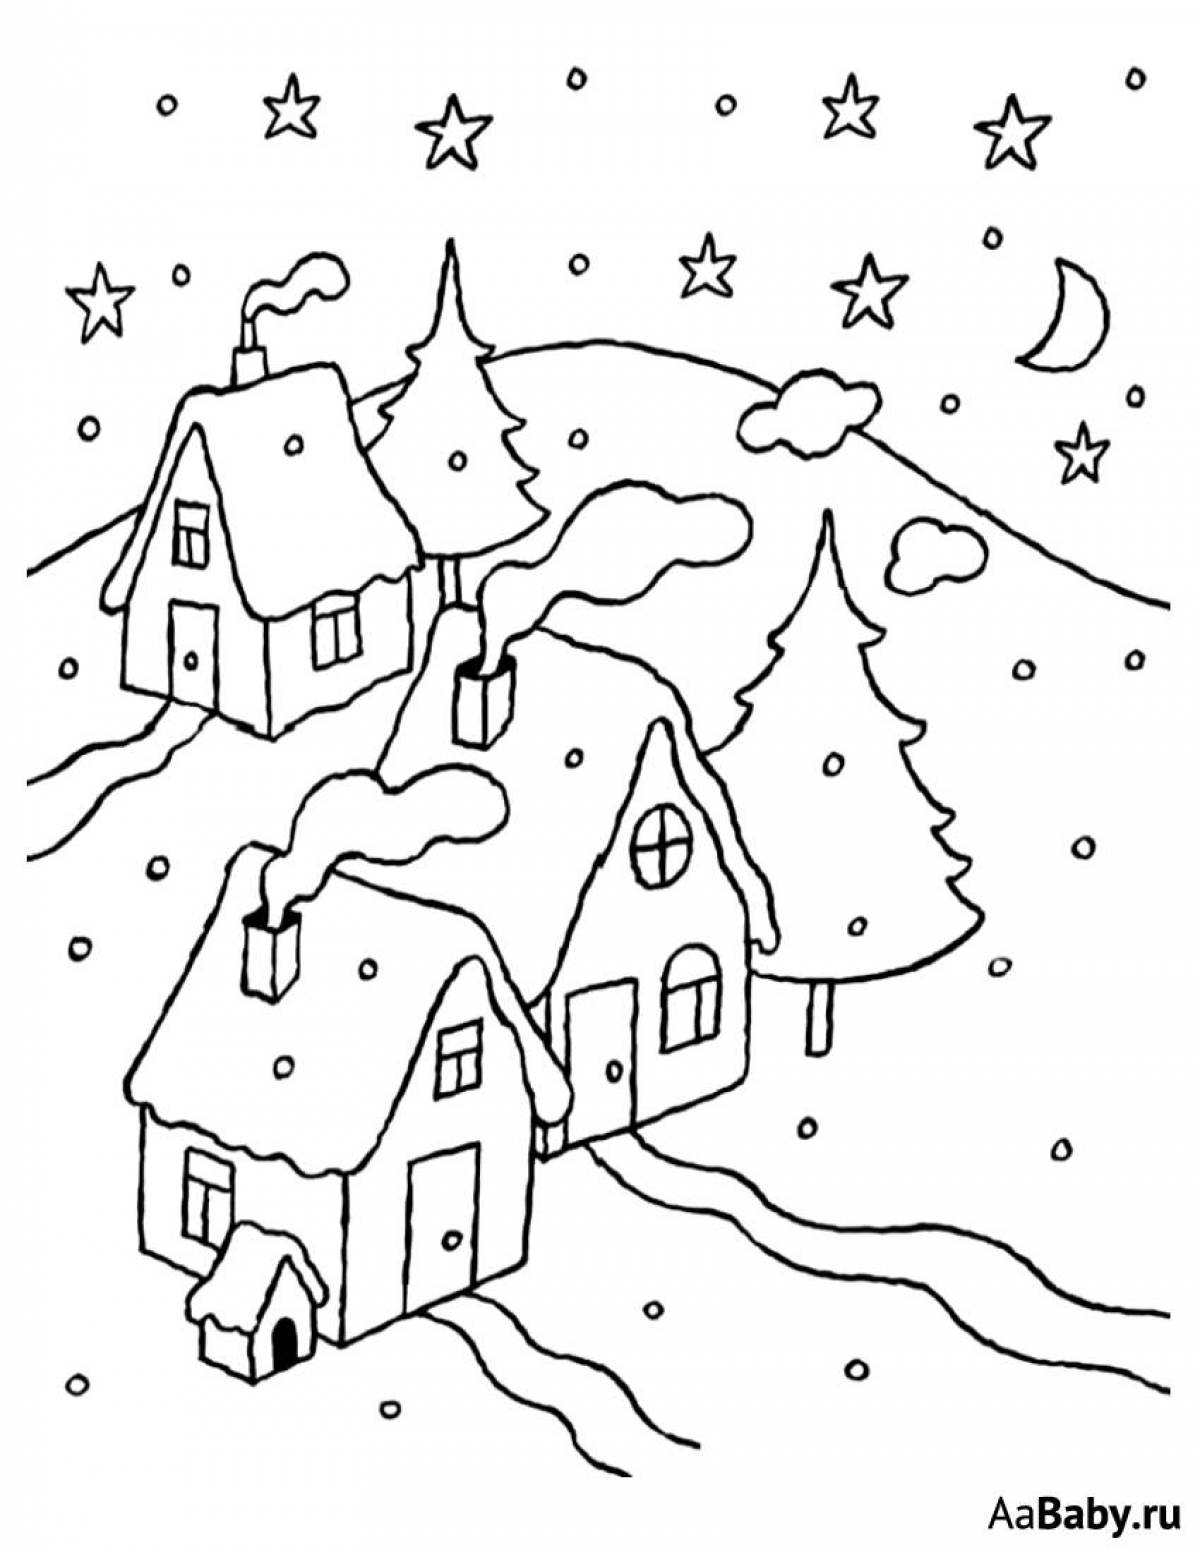 Glowing winter landscape coloring pages for kids